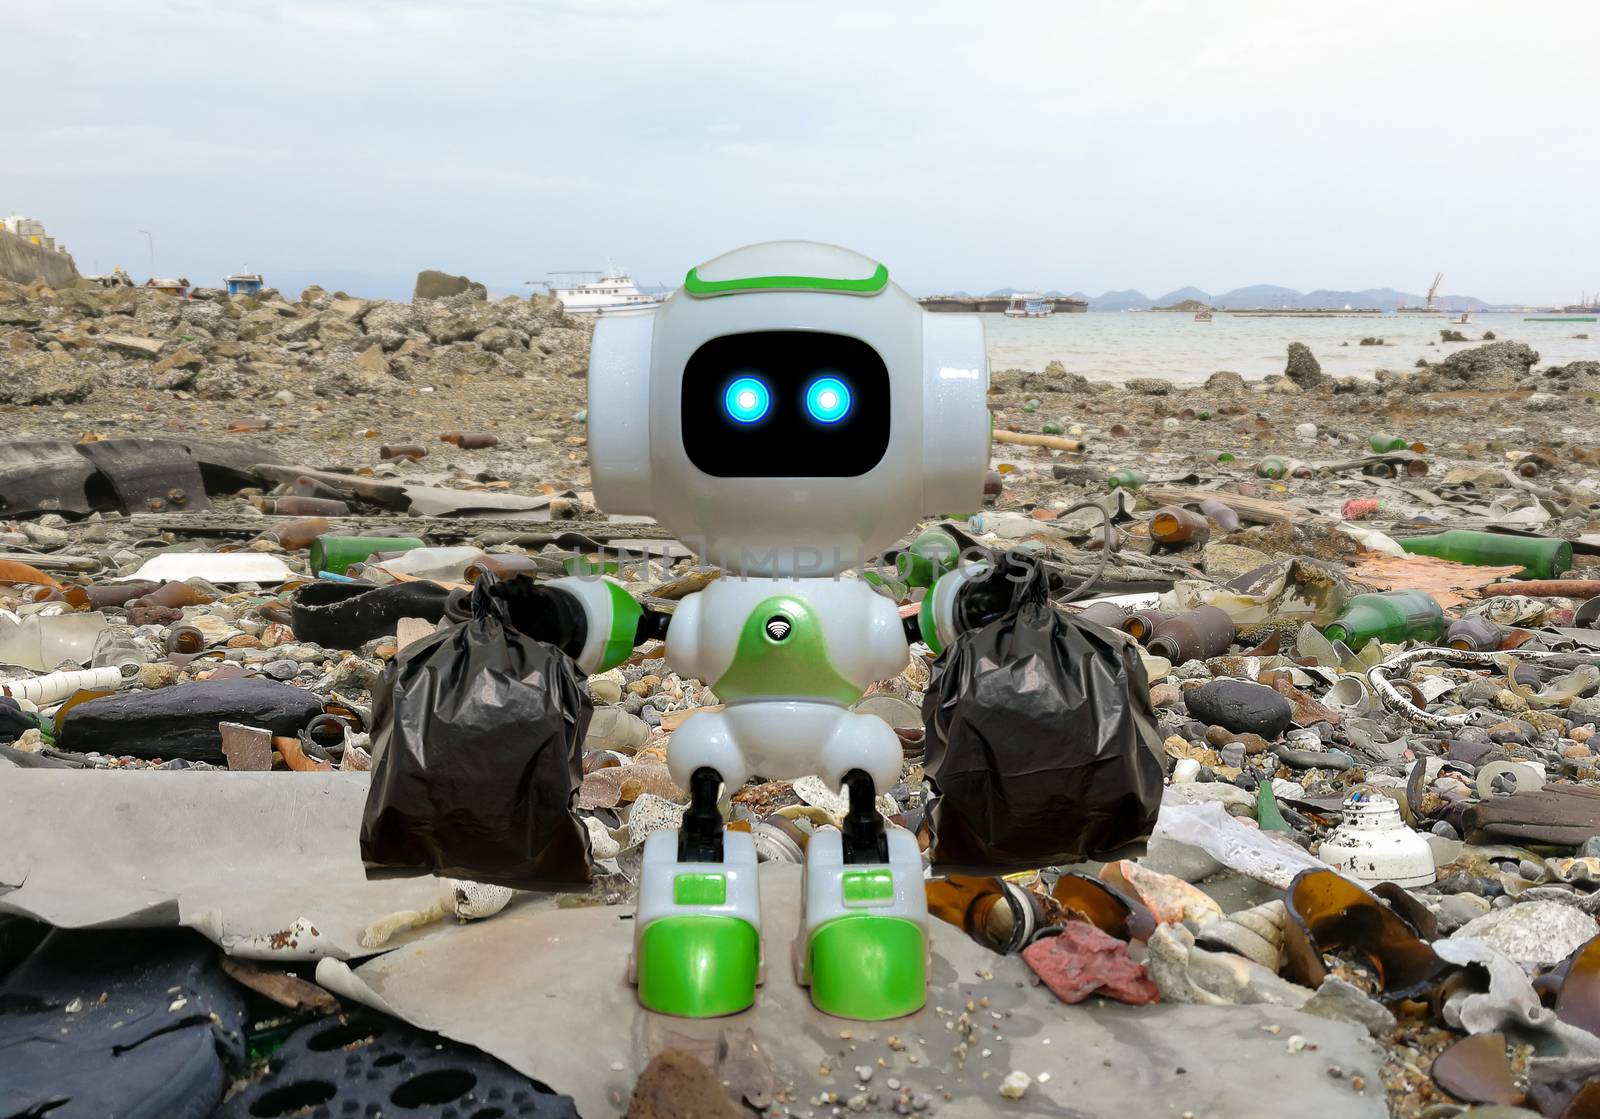 Robot technology to collect black garbage bag instead of humans by sompongtom